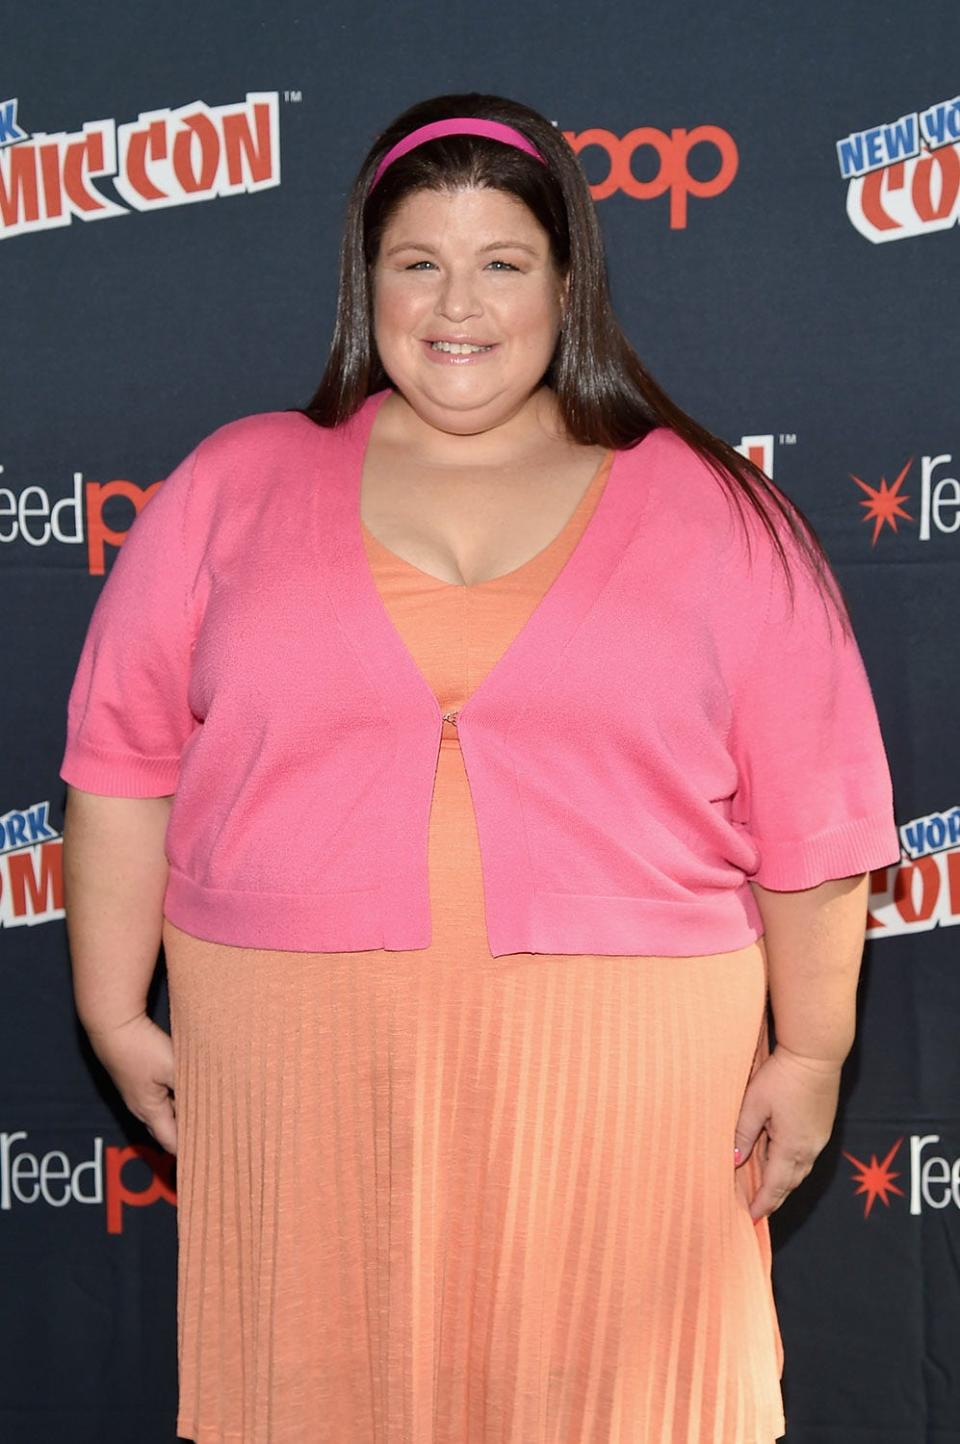 Lori Beth Denberg accused Dan Schneider of inappropriate behavior in an interview with Business Insider.